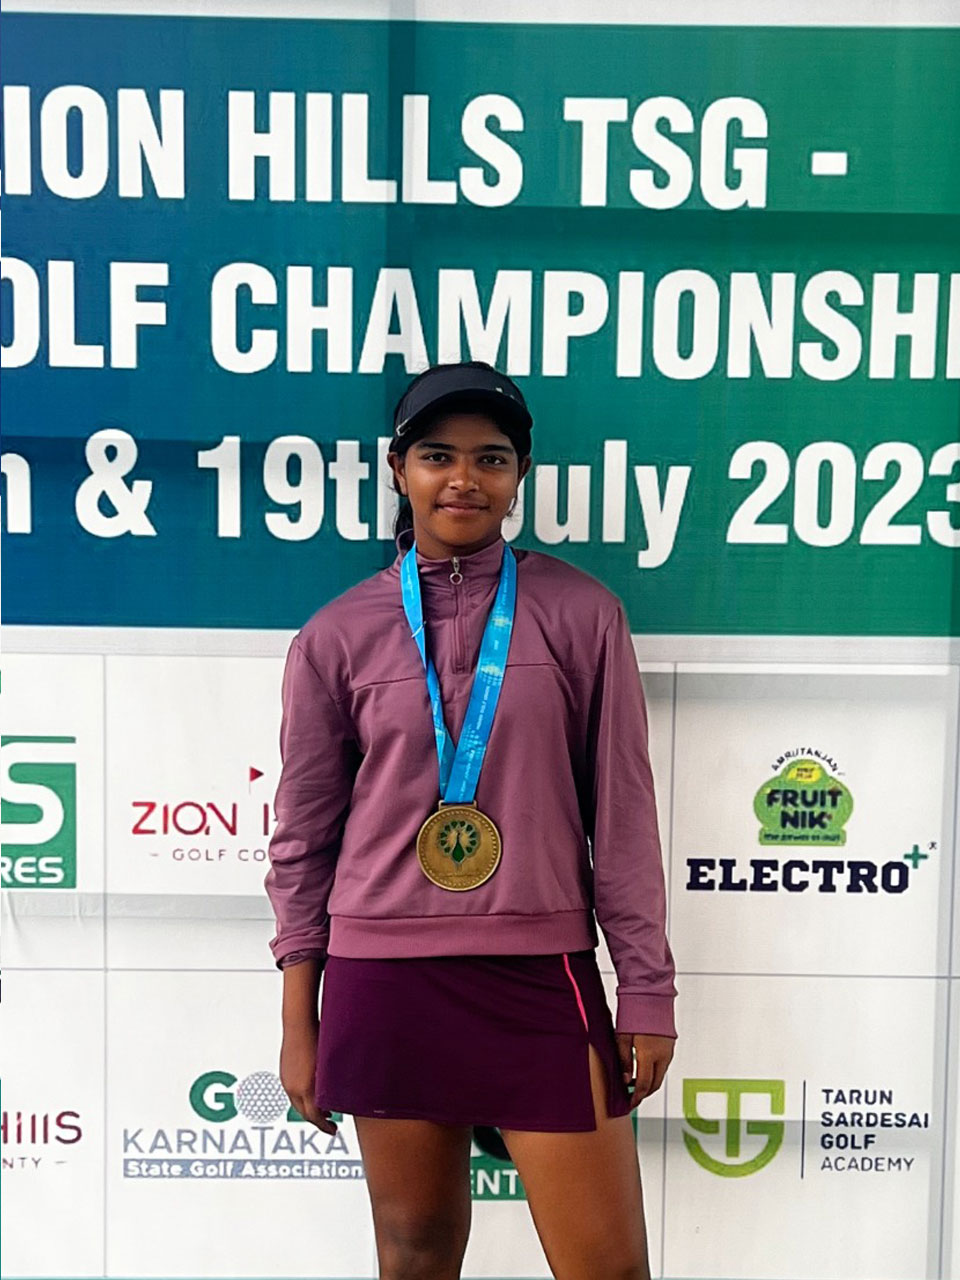 Rashi Mishra finished 2nd  in Category B Girls division